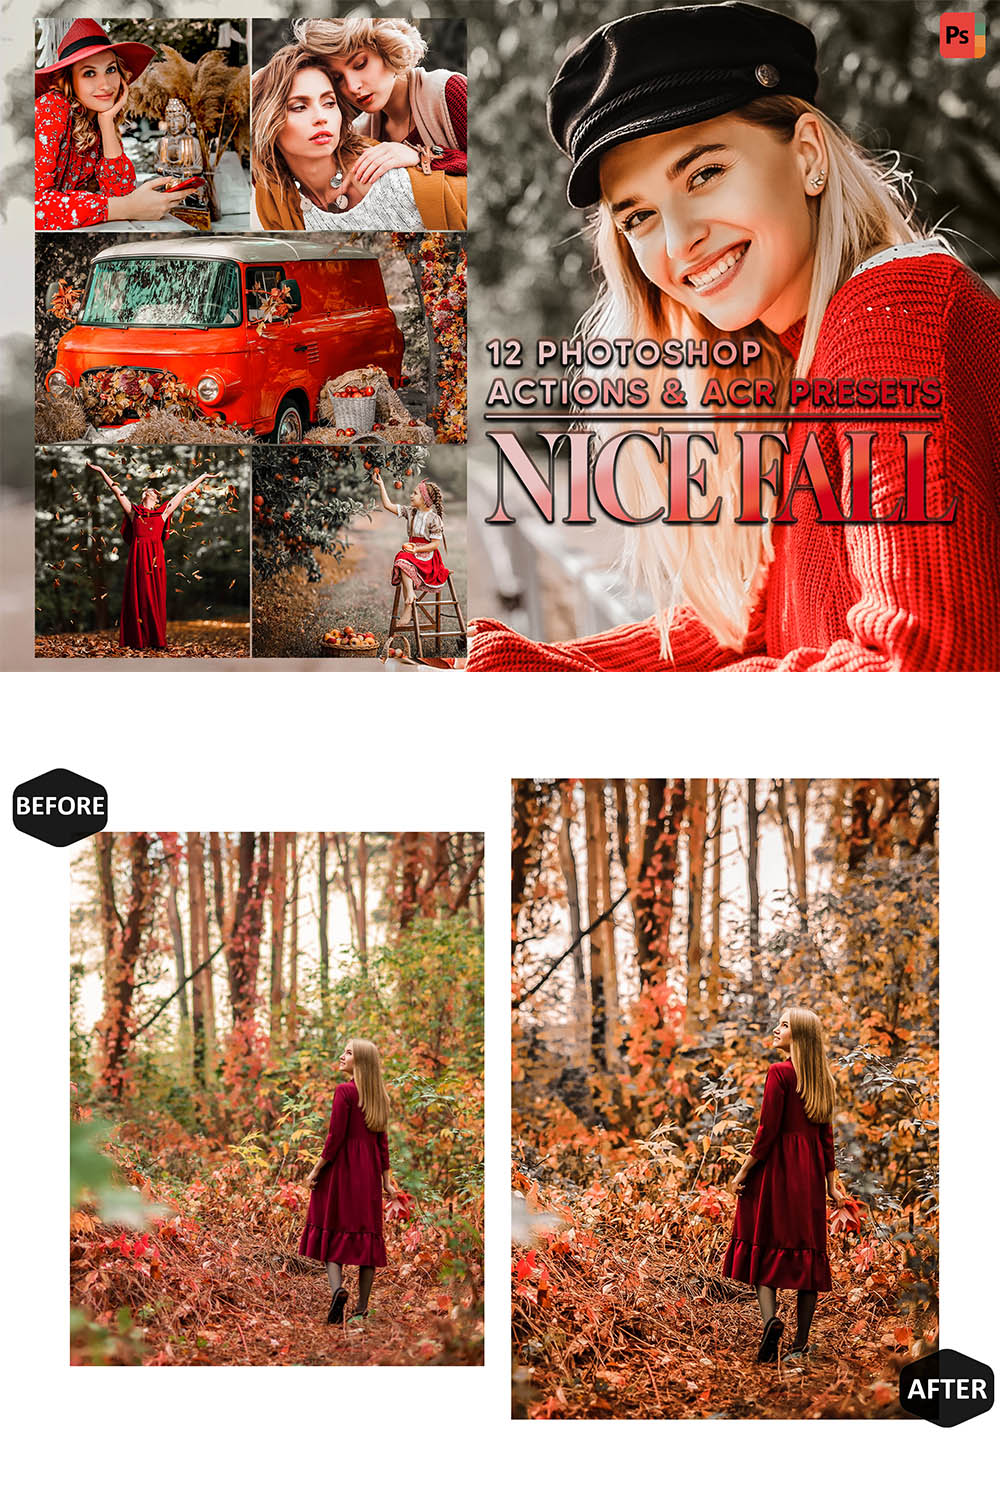 12 Photoshop Actions, Nice Fall Ps Action, Autumn Leaf ACR Preset, Fall Moody Ps Filter, Portrait And Lifestyle Theme For Instagram, Blogger pinterest preview image.